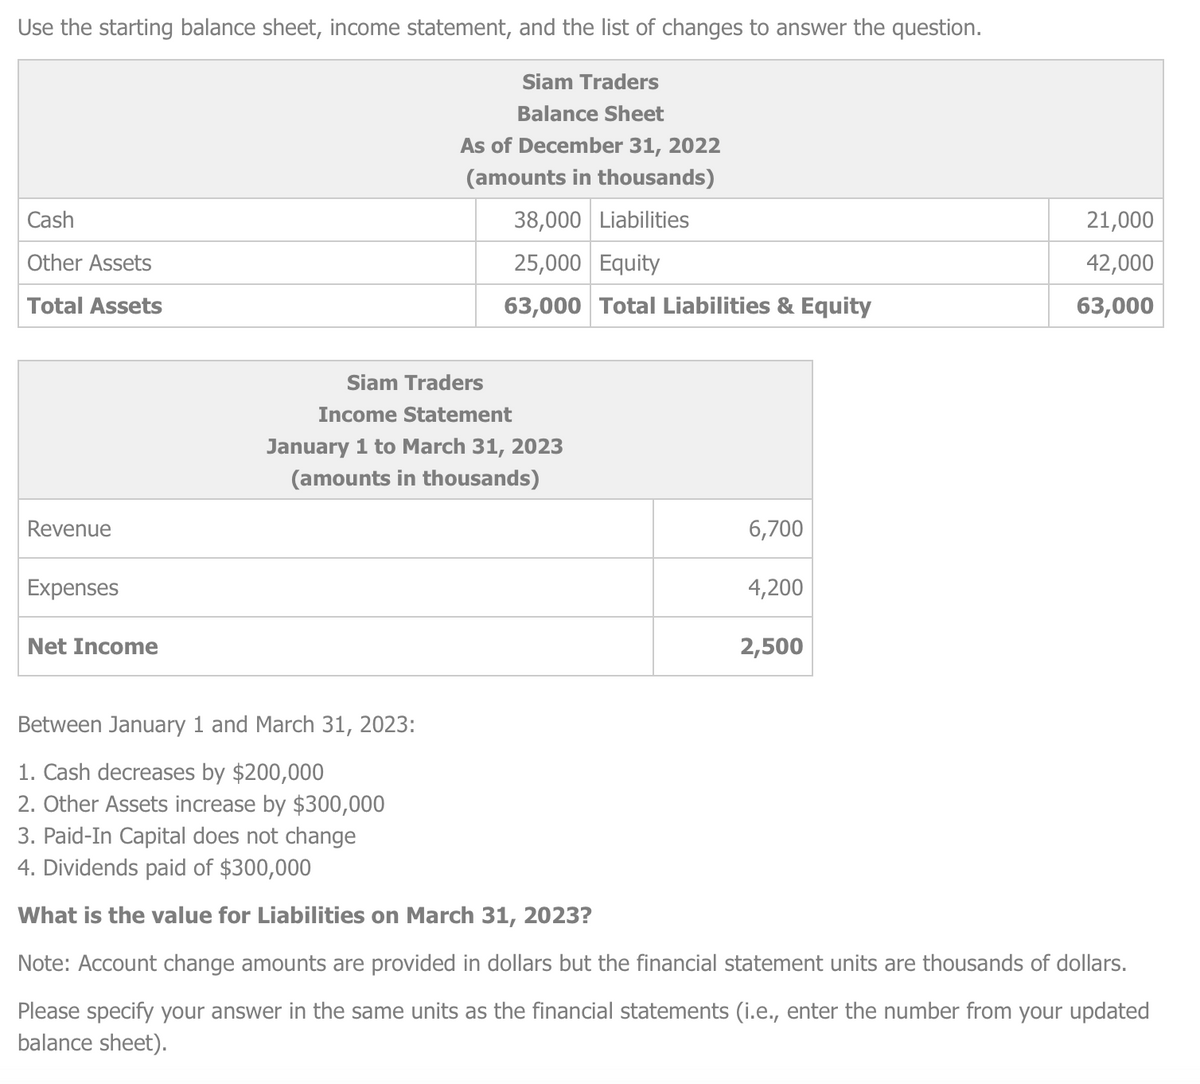 Use the starting balance sheet, income statement, and the list of changes to answer the question.
Siam Traders
Balance Sheet
As of December 31, 2022
(amounts in thousands)
38,000 Liabilities
Cash
Other Assets
Total Assets
Revenue
Expenses
Net Income
25,000 Equity
63,000 Total Liabilities & Equity
Siam Traders
Income Statement
January 1 to March 31, 2023
(amounts in thousands)
6,700
4,200
2,500
21,000
42,000
63,000
Between January 1 and March 31, 2023:
1. Cash decreases by $200,000
2. Other Assets increase by $300,000
3. Paid-In Capital does not change
4. Dividends paid of $300,000
What is the value for Liabilities on March 31, 2023?
Note: Account change amounts are provided in dollars but the financial statement units are thousands of dollars.
Please specify your answer in the same units as the financial statements (i.e., enter the number from your updated
balance sheet).